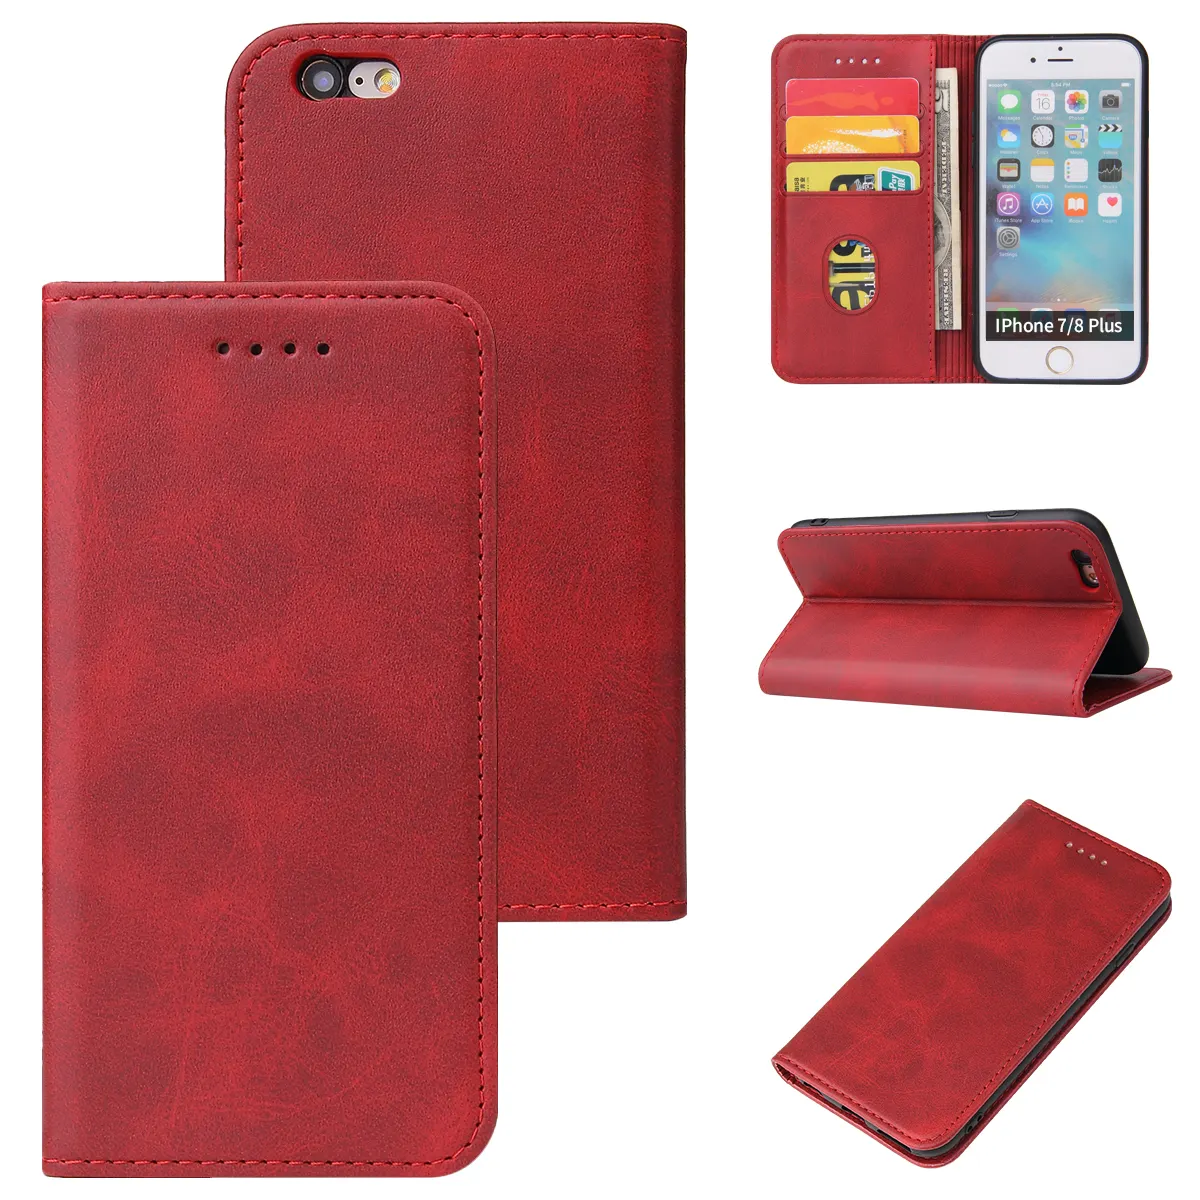 Leather Luxury Magnetic Leather Flip Wallet Case For iPhone 5 5S 6 6S 7 8 Plus X XS 11 12 Pro MAX Phone Cover